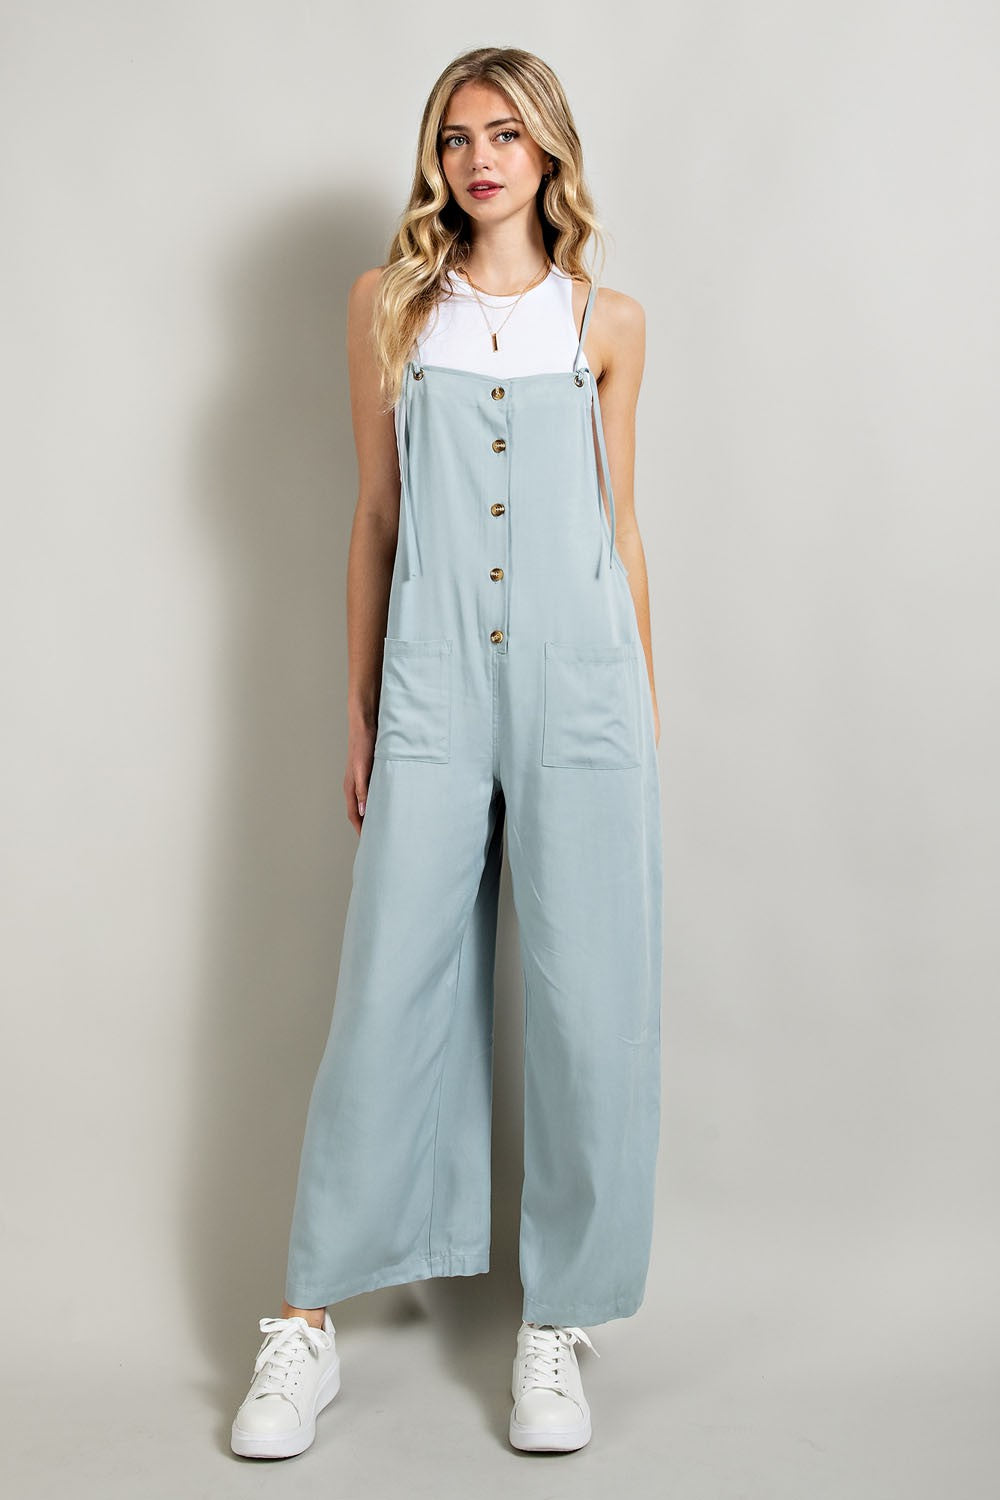 Oh, Sunny Day! Romper in Blue